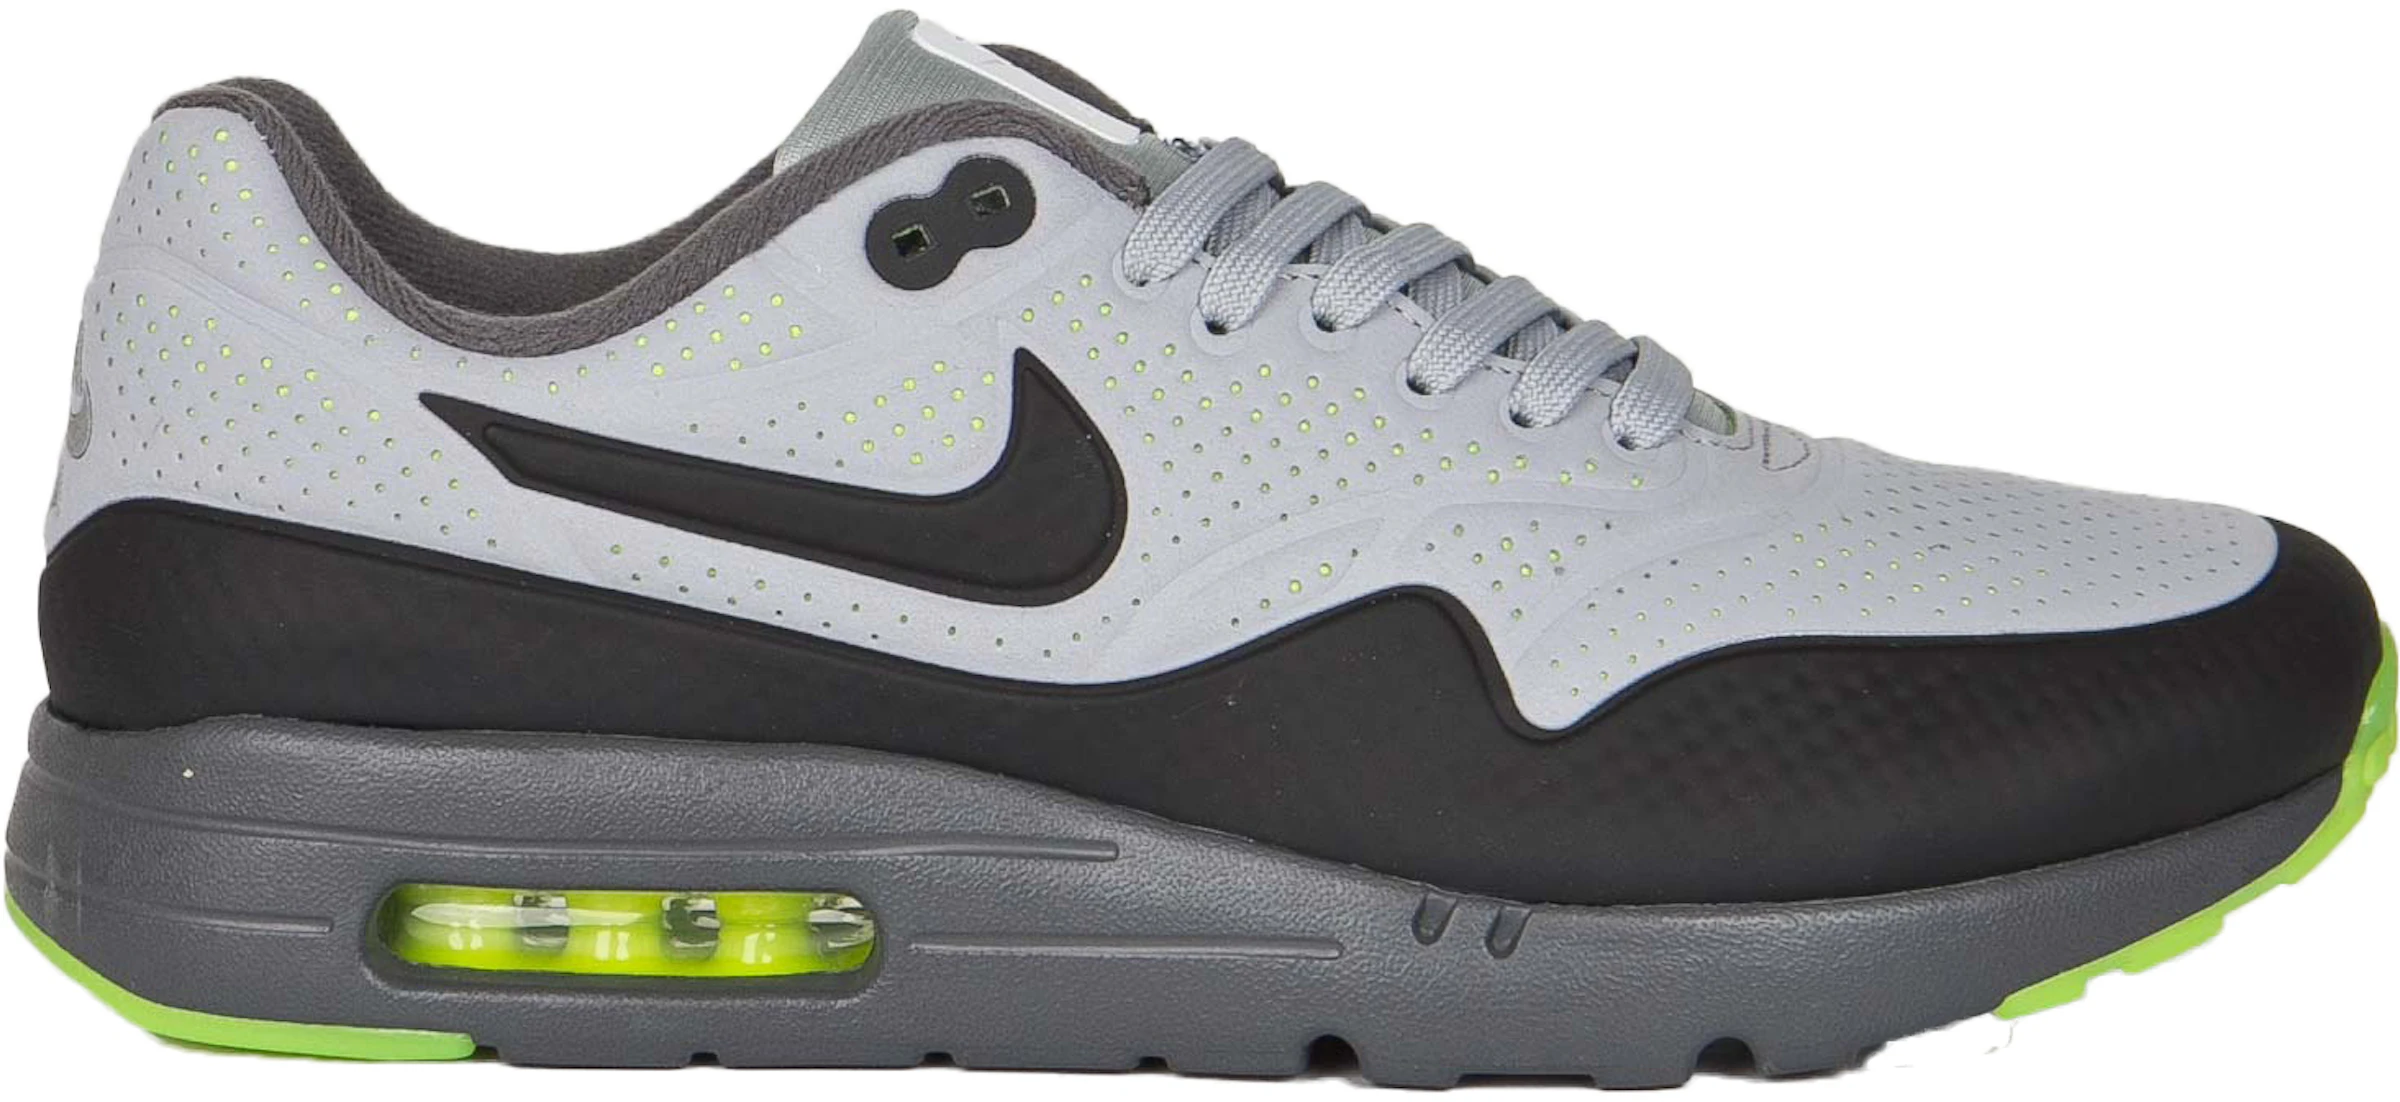 Air Max 1 Ultra Moire Wolf Grey Volt - 705297-007 - US